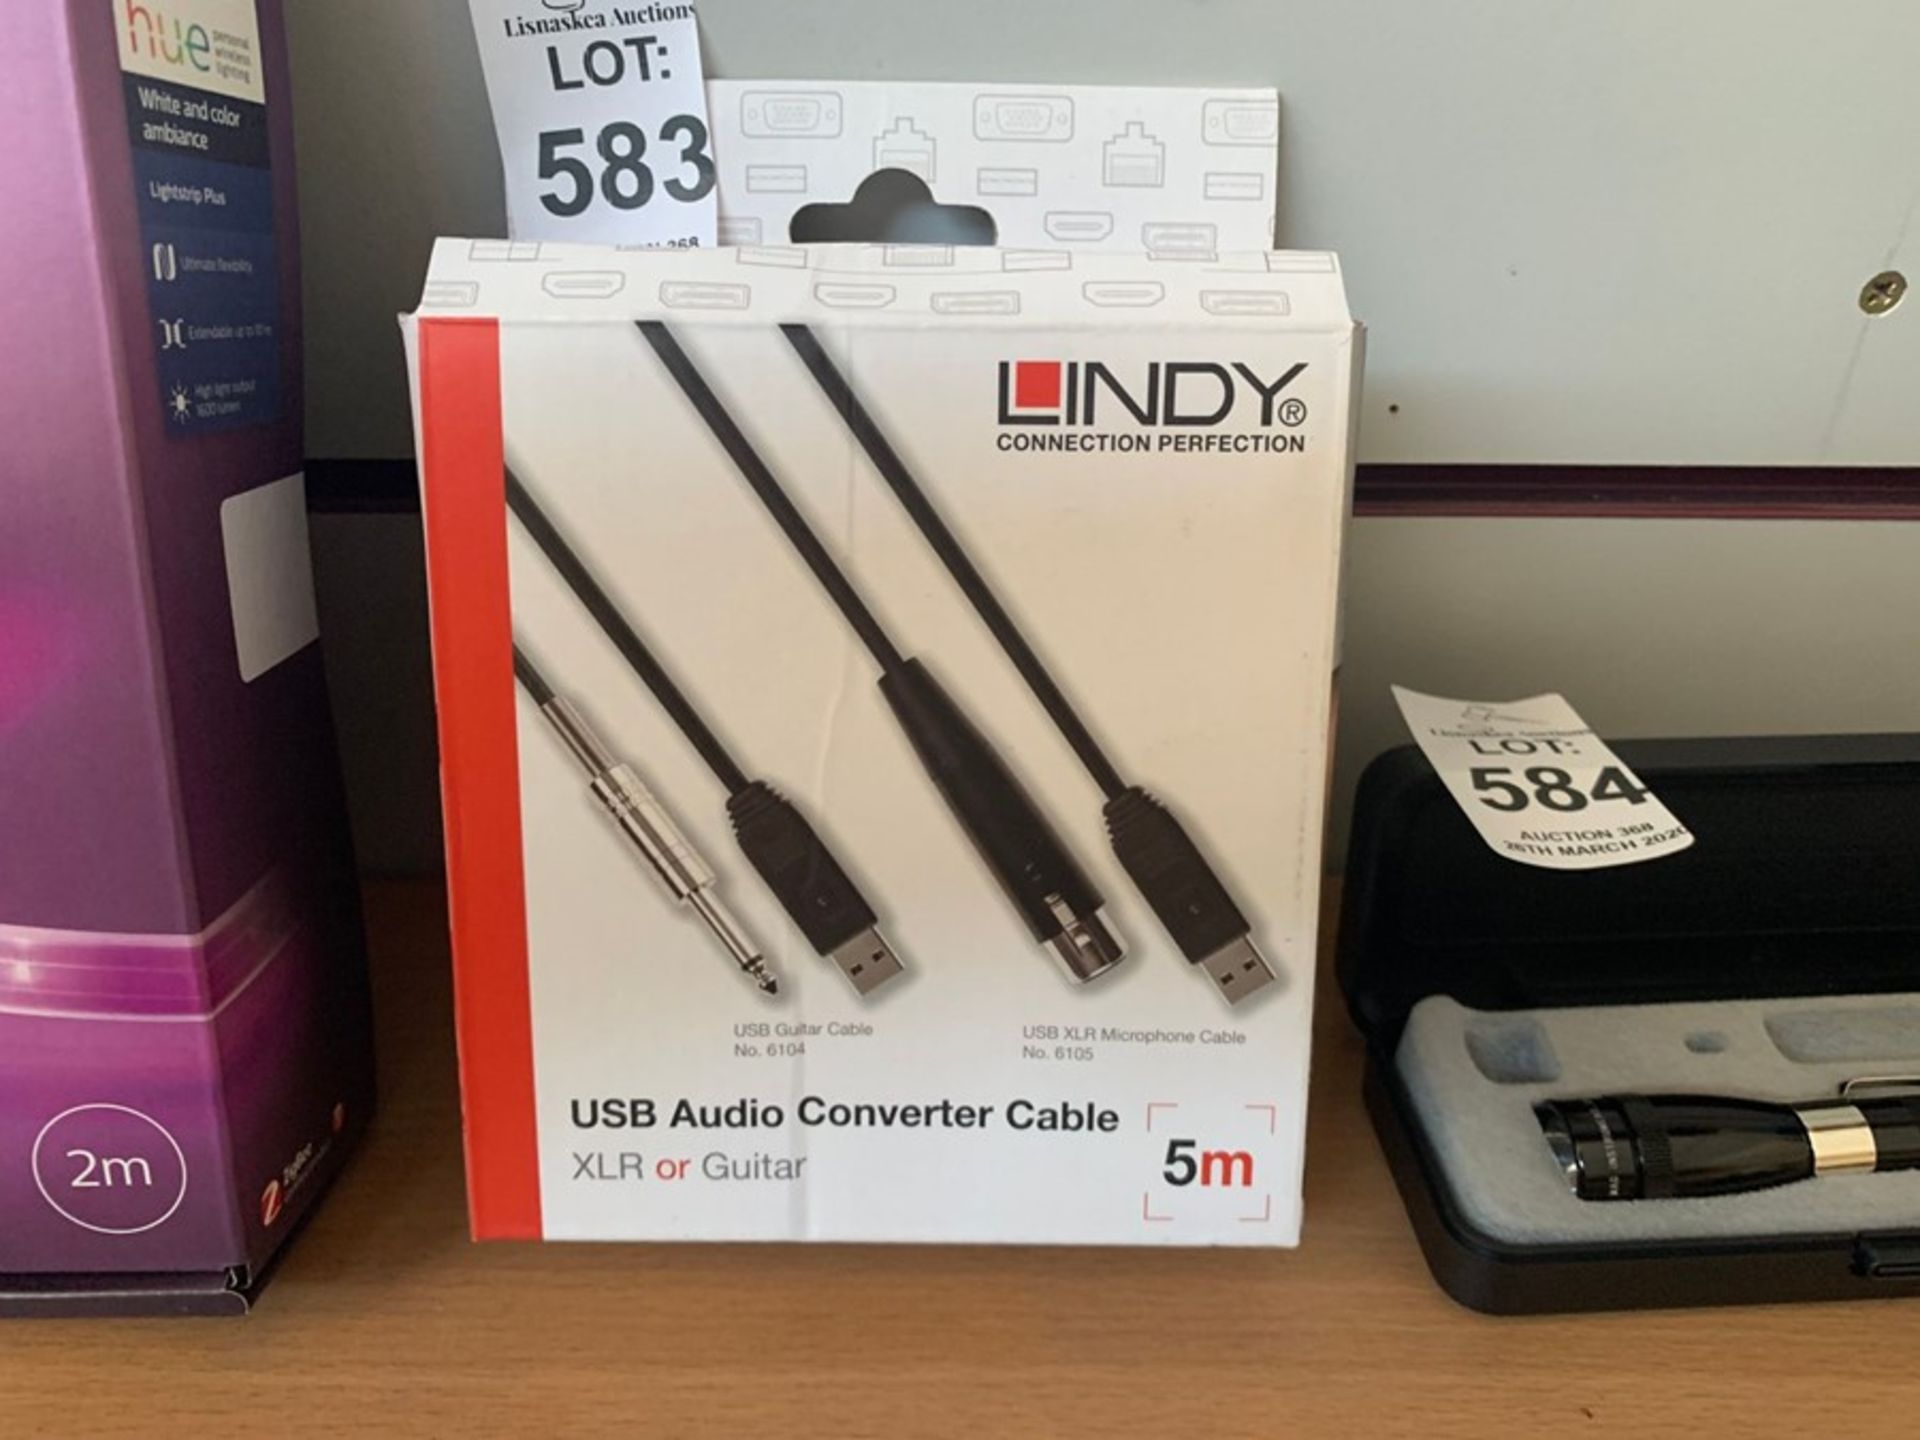 LINDY 5M USB AUDIO CONVERTER CABLE FOR XLR OR GUITAR (EX-SHOP DISPLAY)